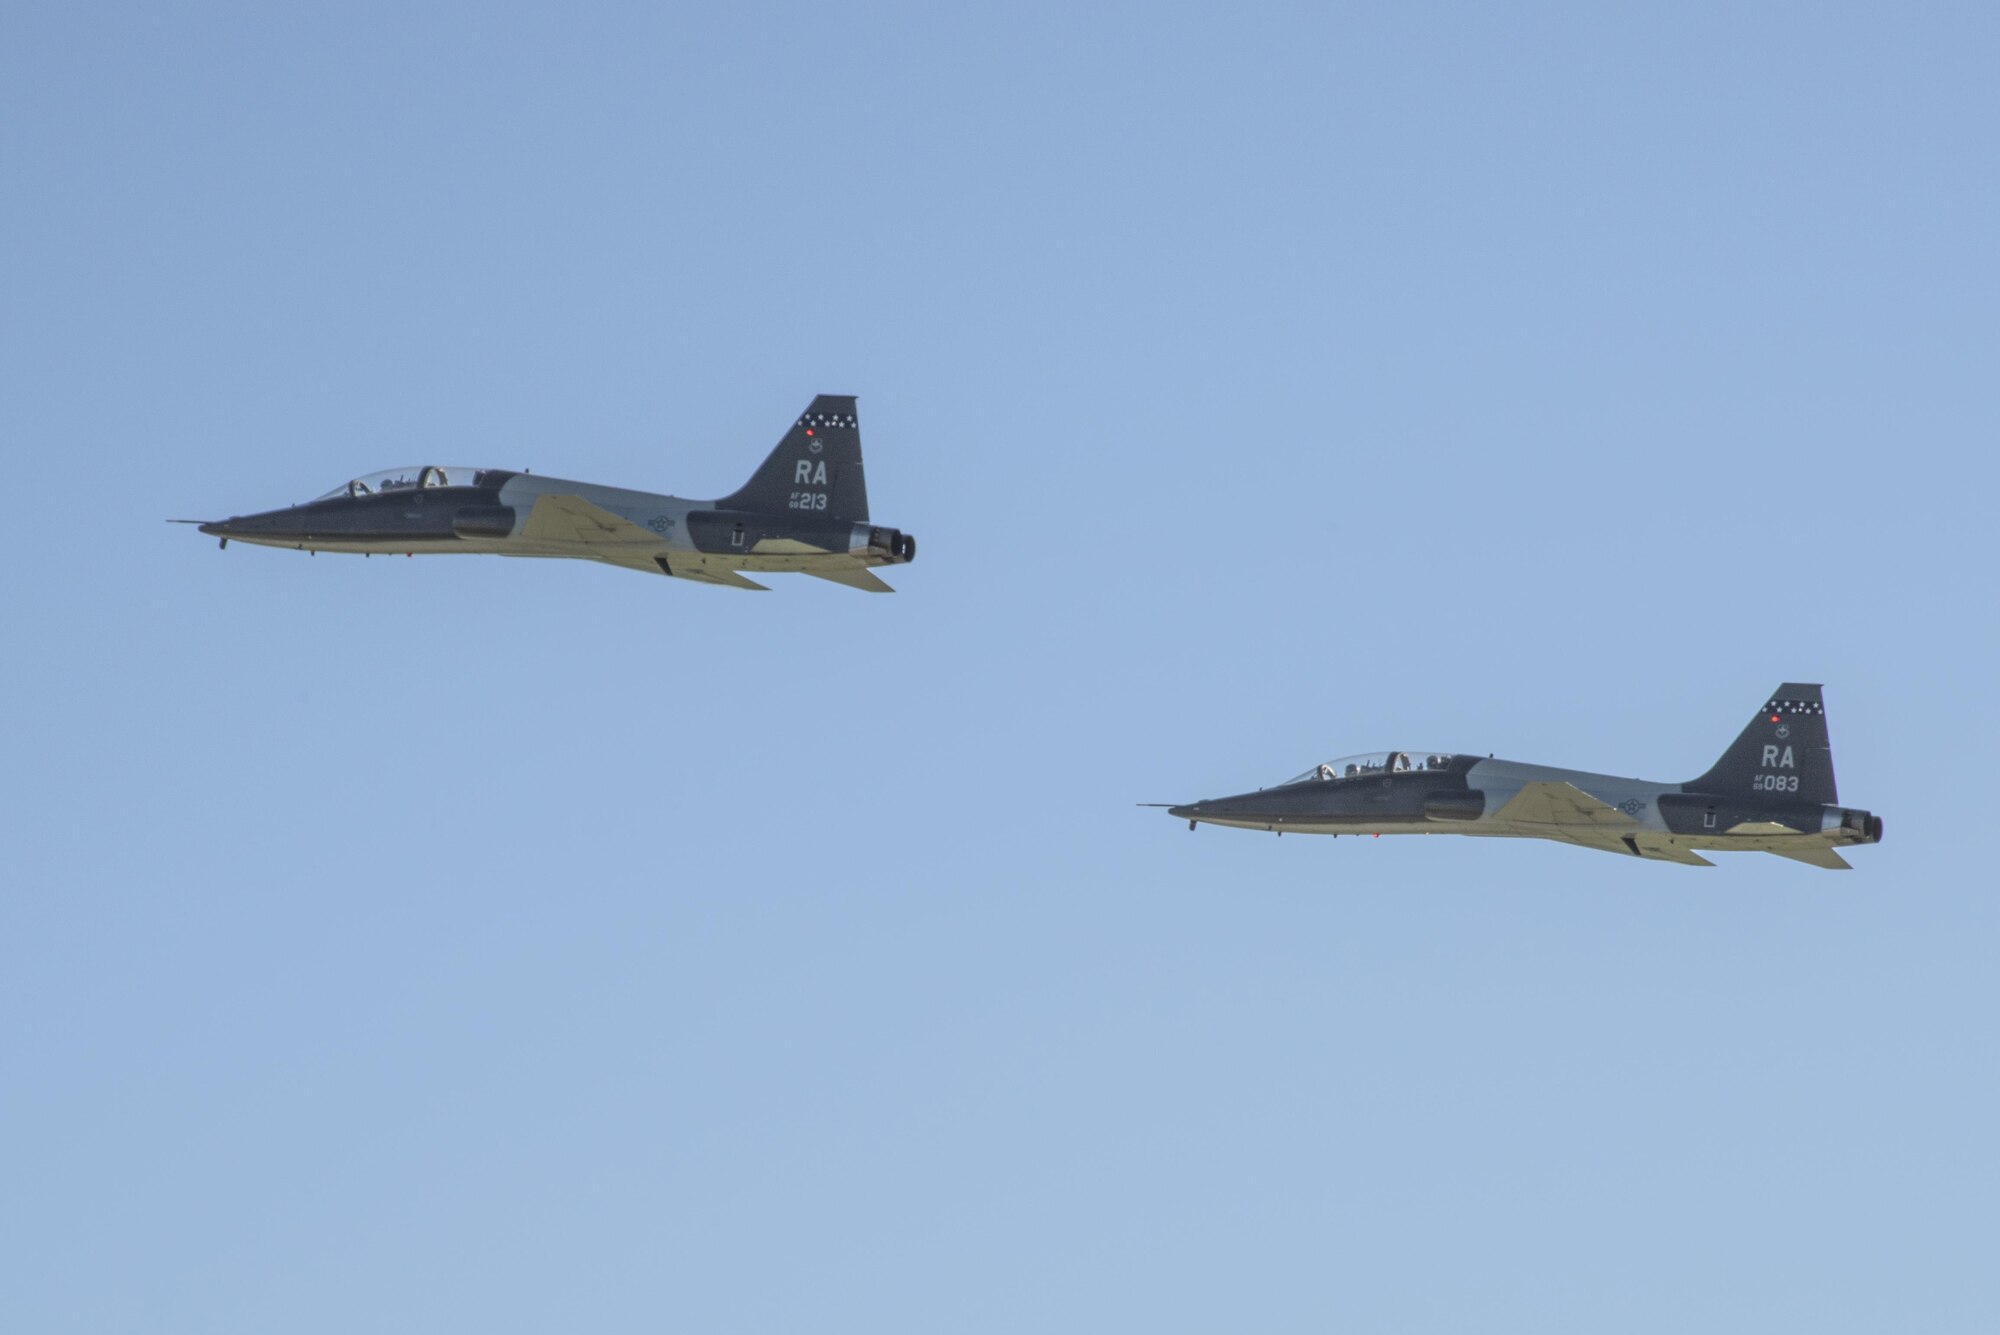 T-38 C Talons piloted by members of the 39th Flying Training Squadron take off from Joint Base San Antonio-Randolph, Texas May 4, 2017 during the Cobras in the Clouds exercise. The exercise gave 39th FTS members a chance to practice their war-time mission of taking control of the training mission of the 12th Operations Group. (U.S. Air Force photo by Senior Airman Stormy Archer)